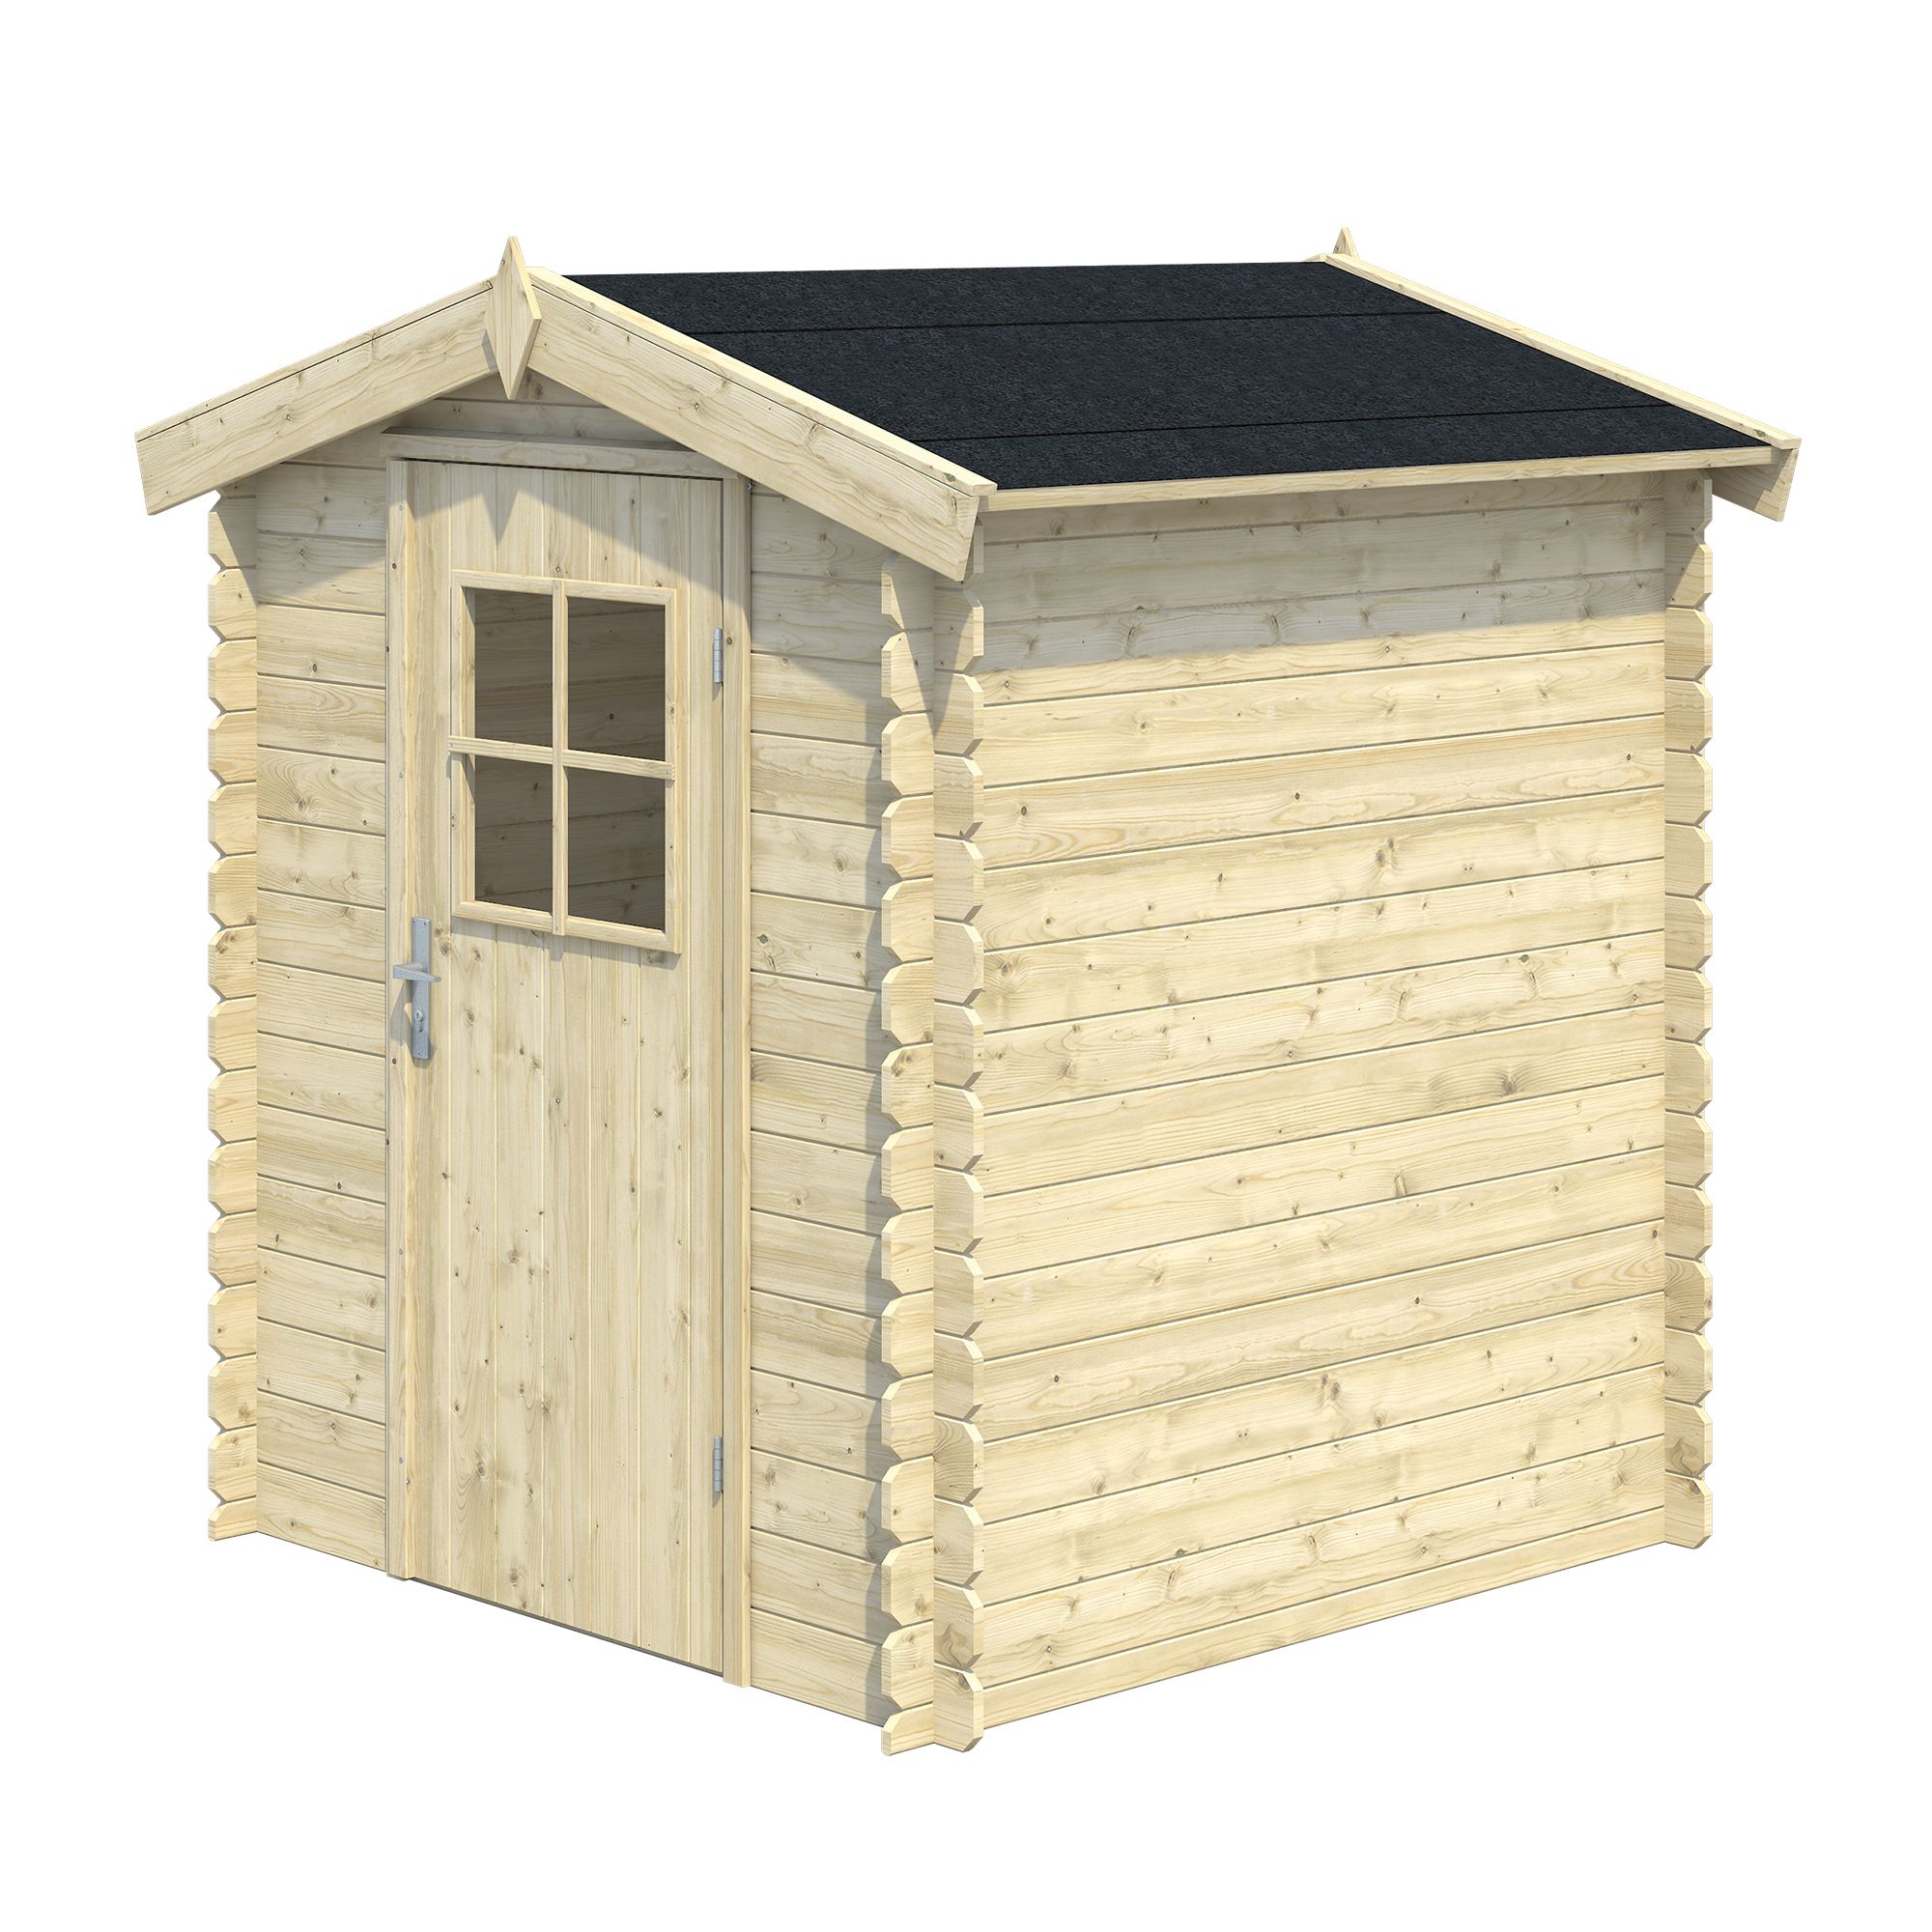 Blooma Mokau 5x5 Apex Tongue & groove Wooden Shed